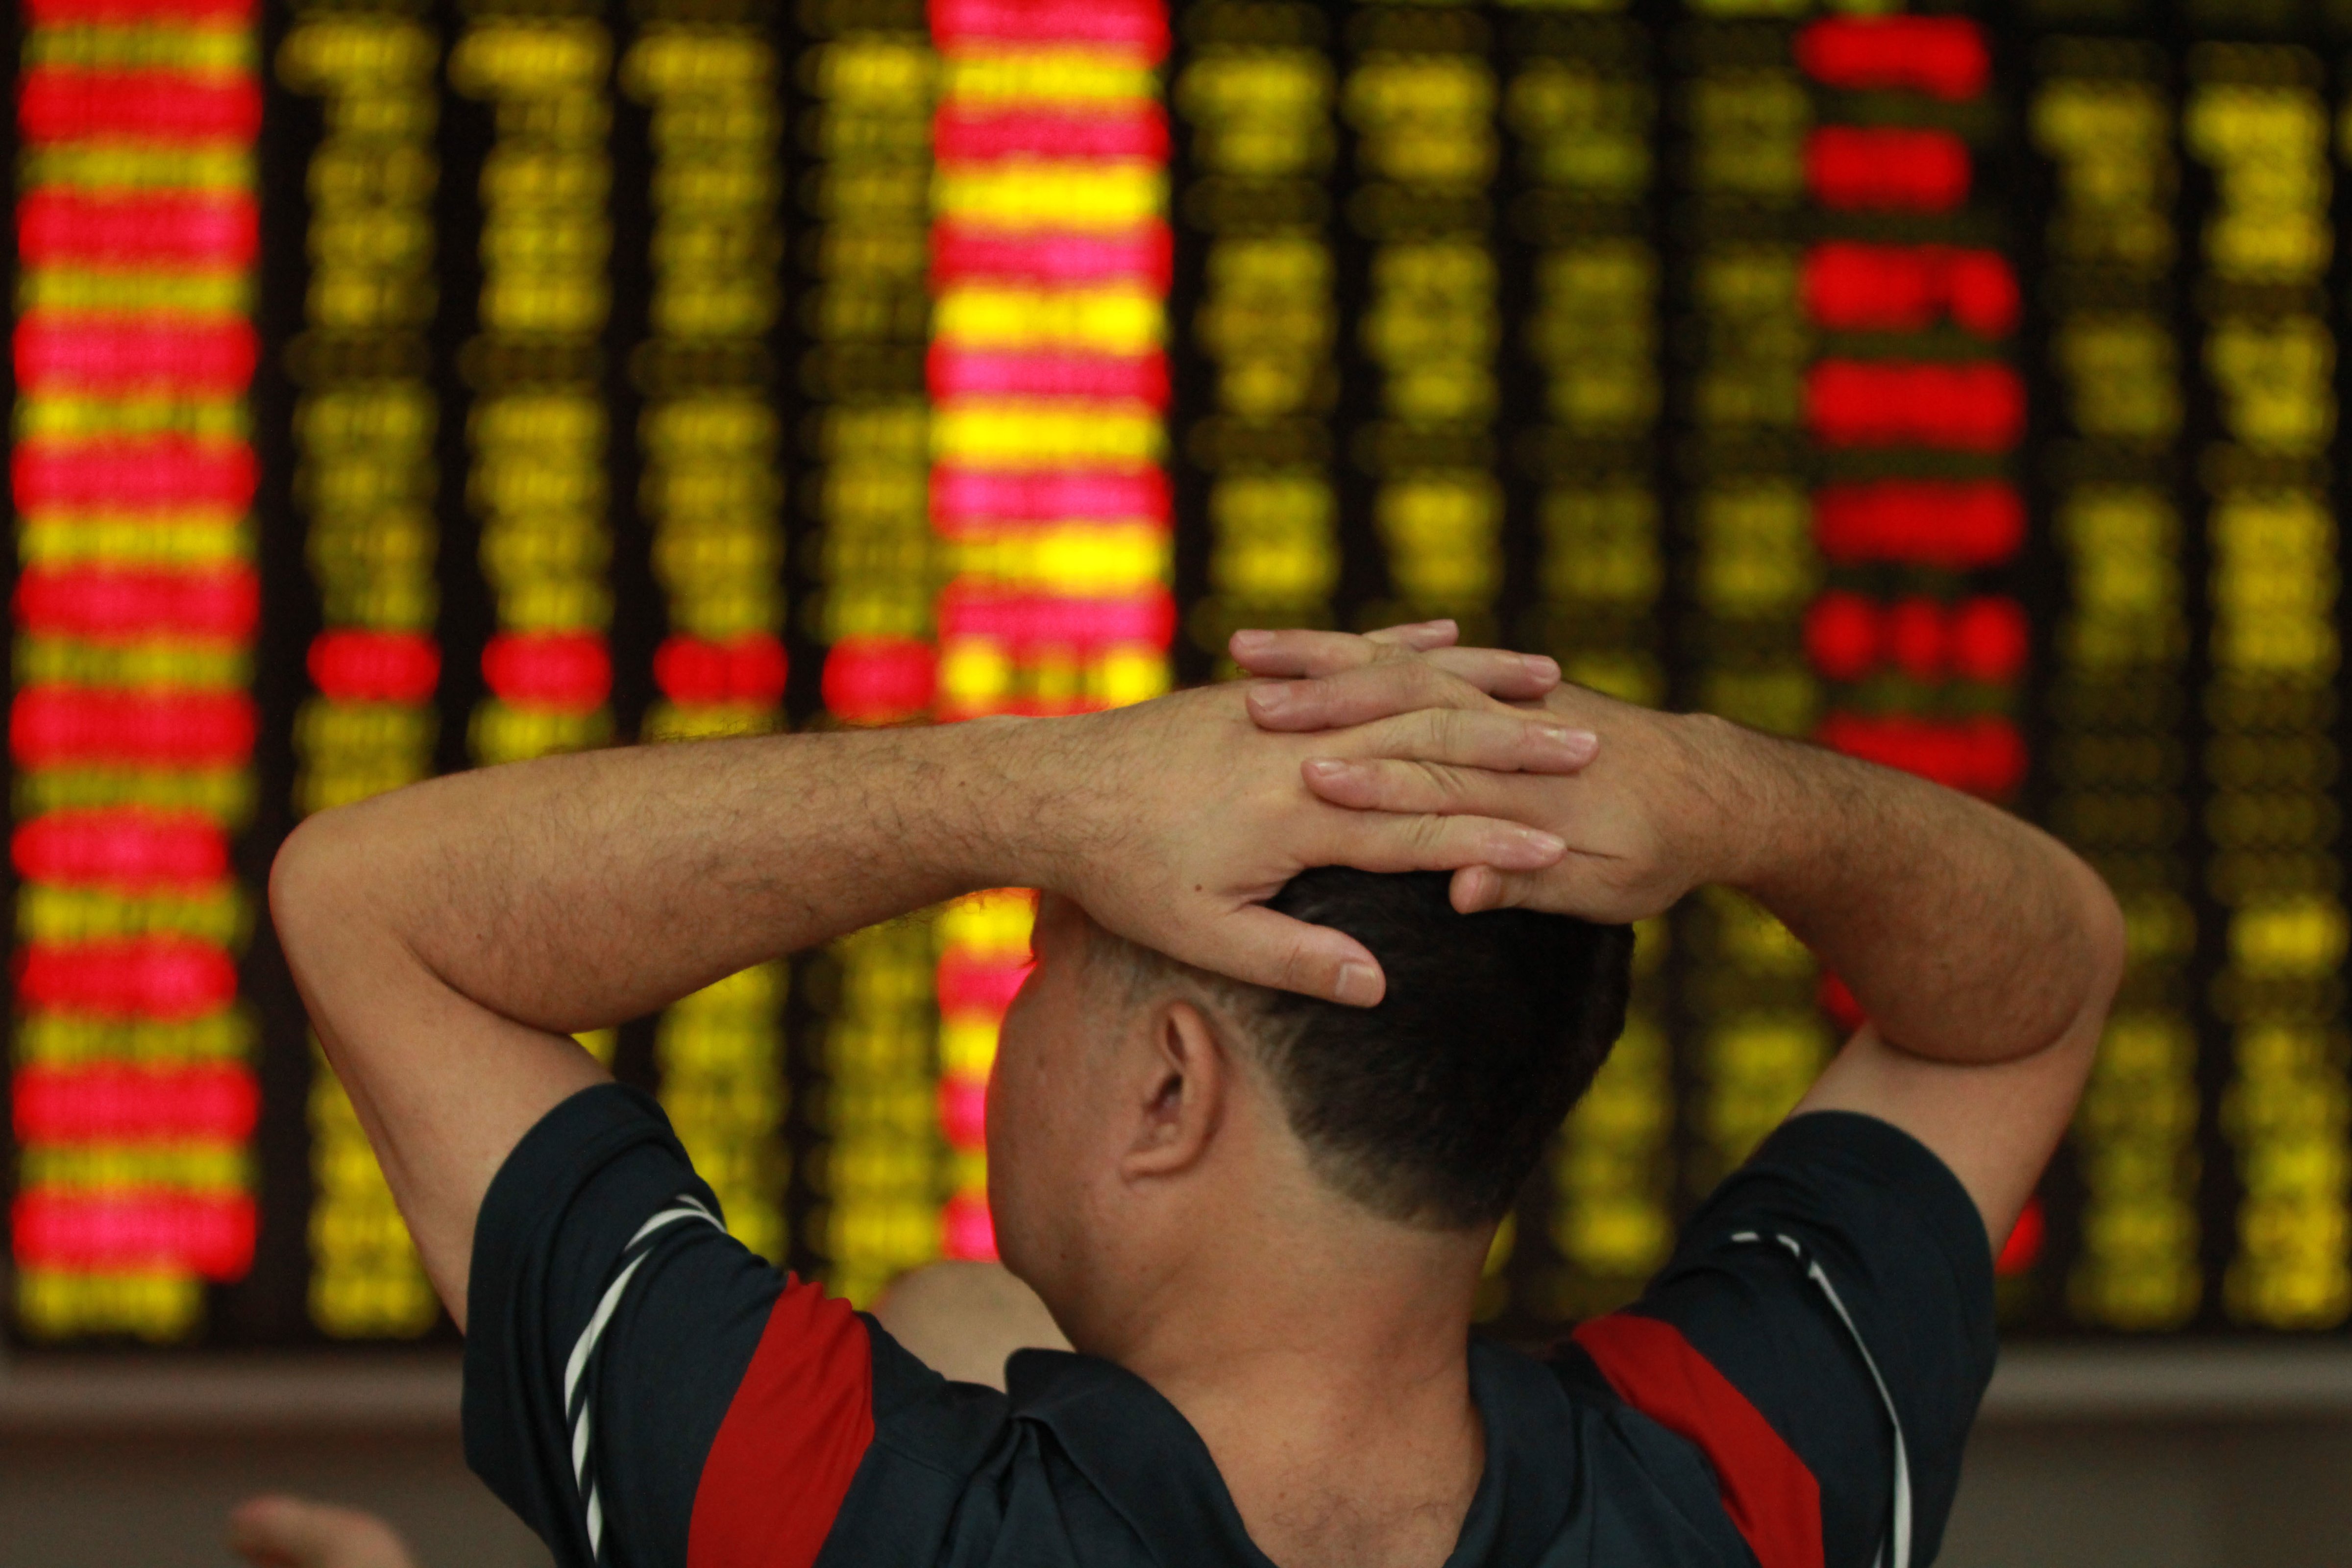 An investor observes stock market at a stock exchange hall on September 2, 2015 in Haikou, Hainan Province of China. (ChinaFotoPress&mdash;ChinaFotoPress via Getty Images)